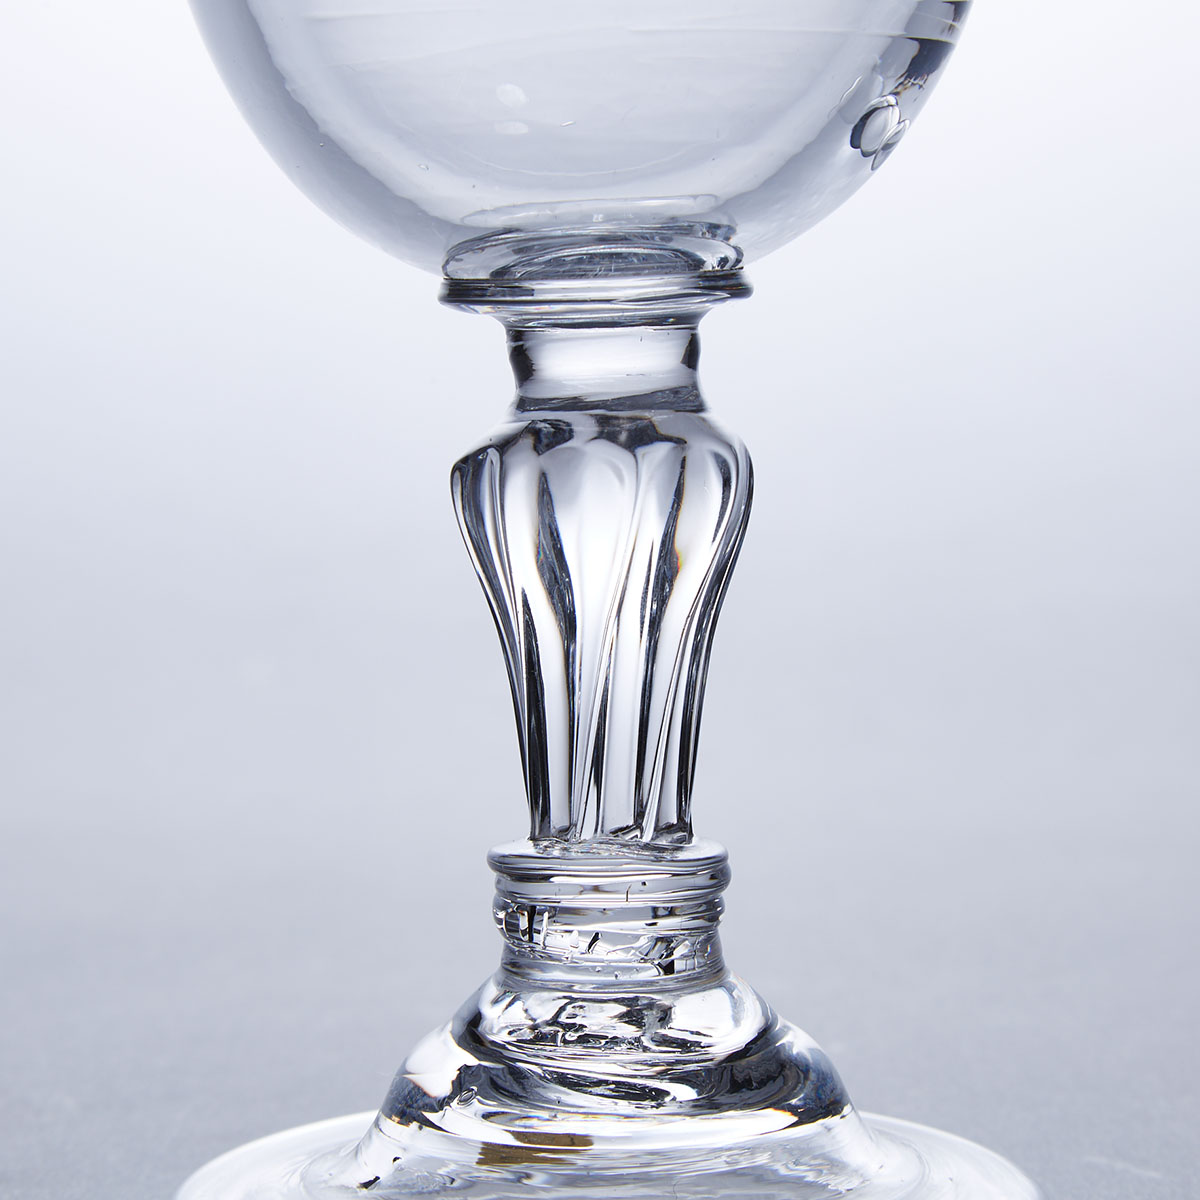 English Moulded Pedestal Stemmed Sweetmeat or Champagne Glass, c.1760